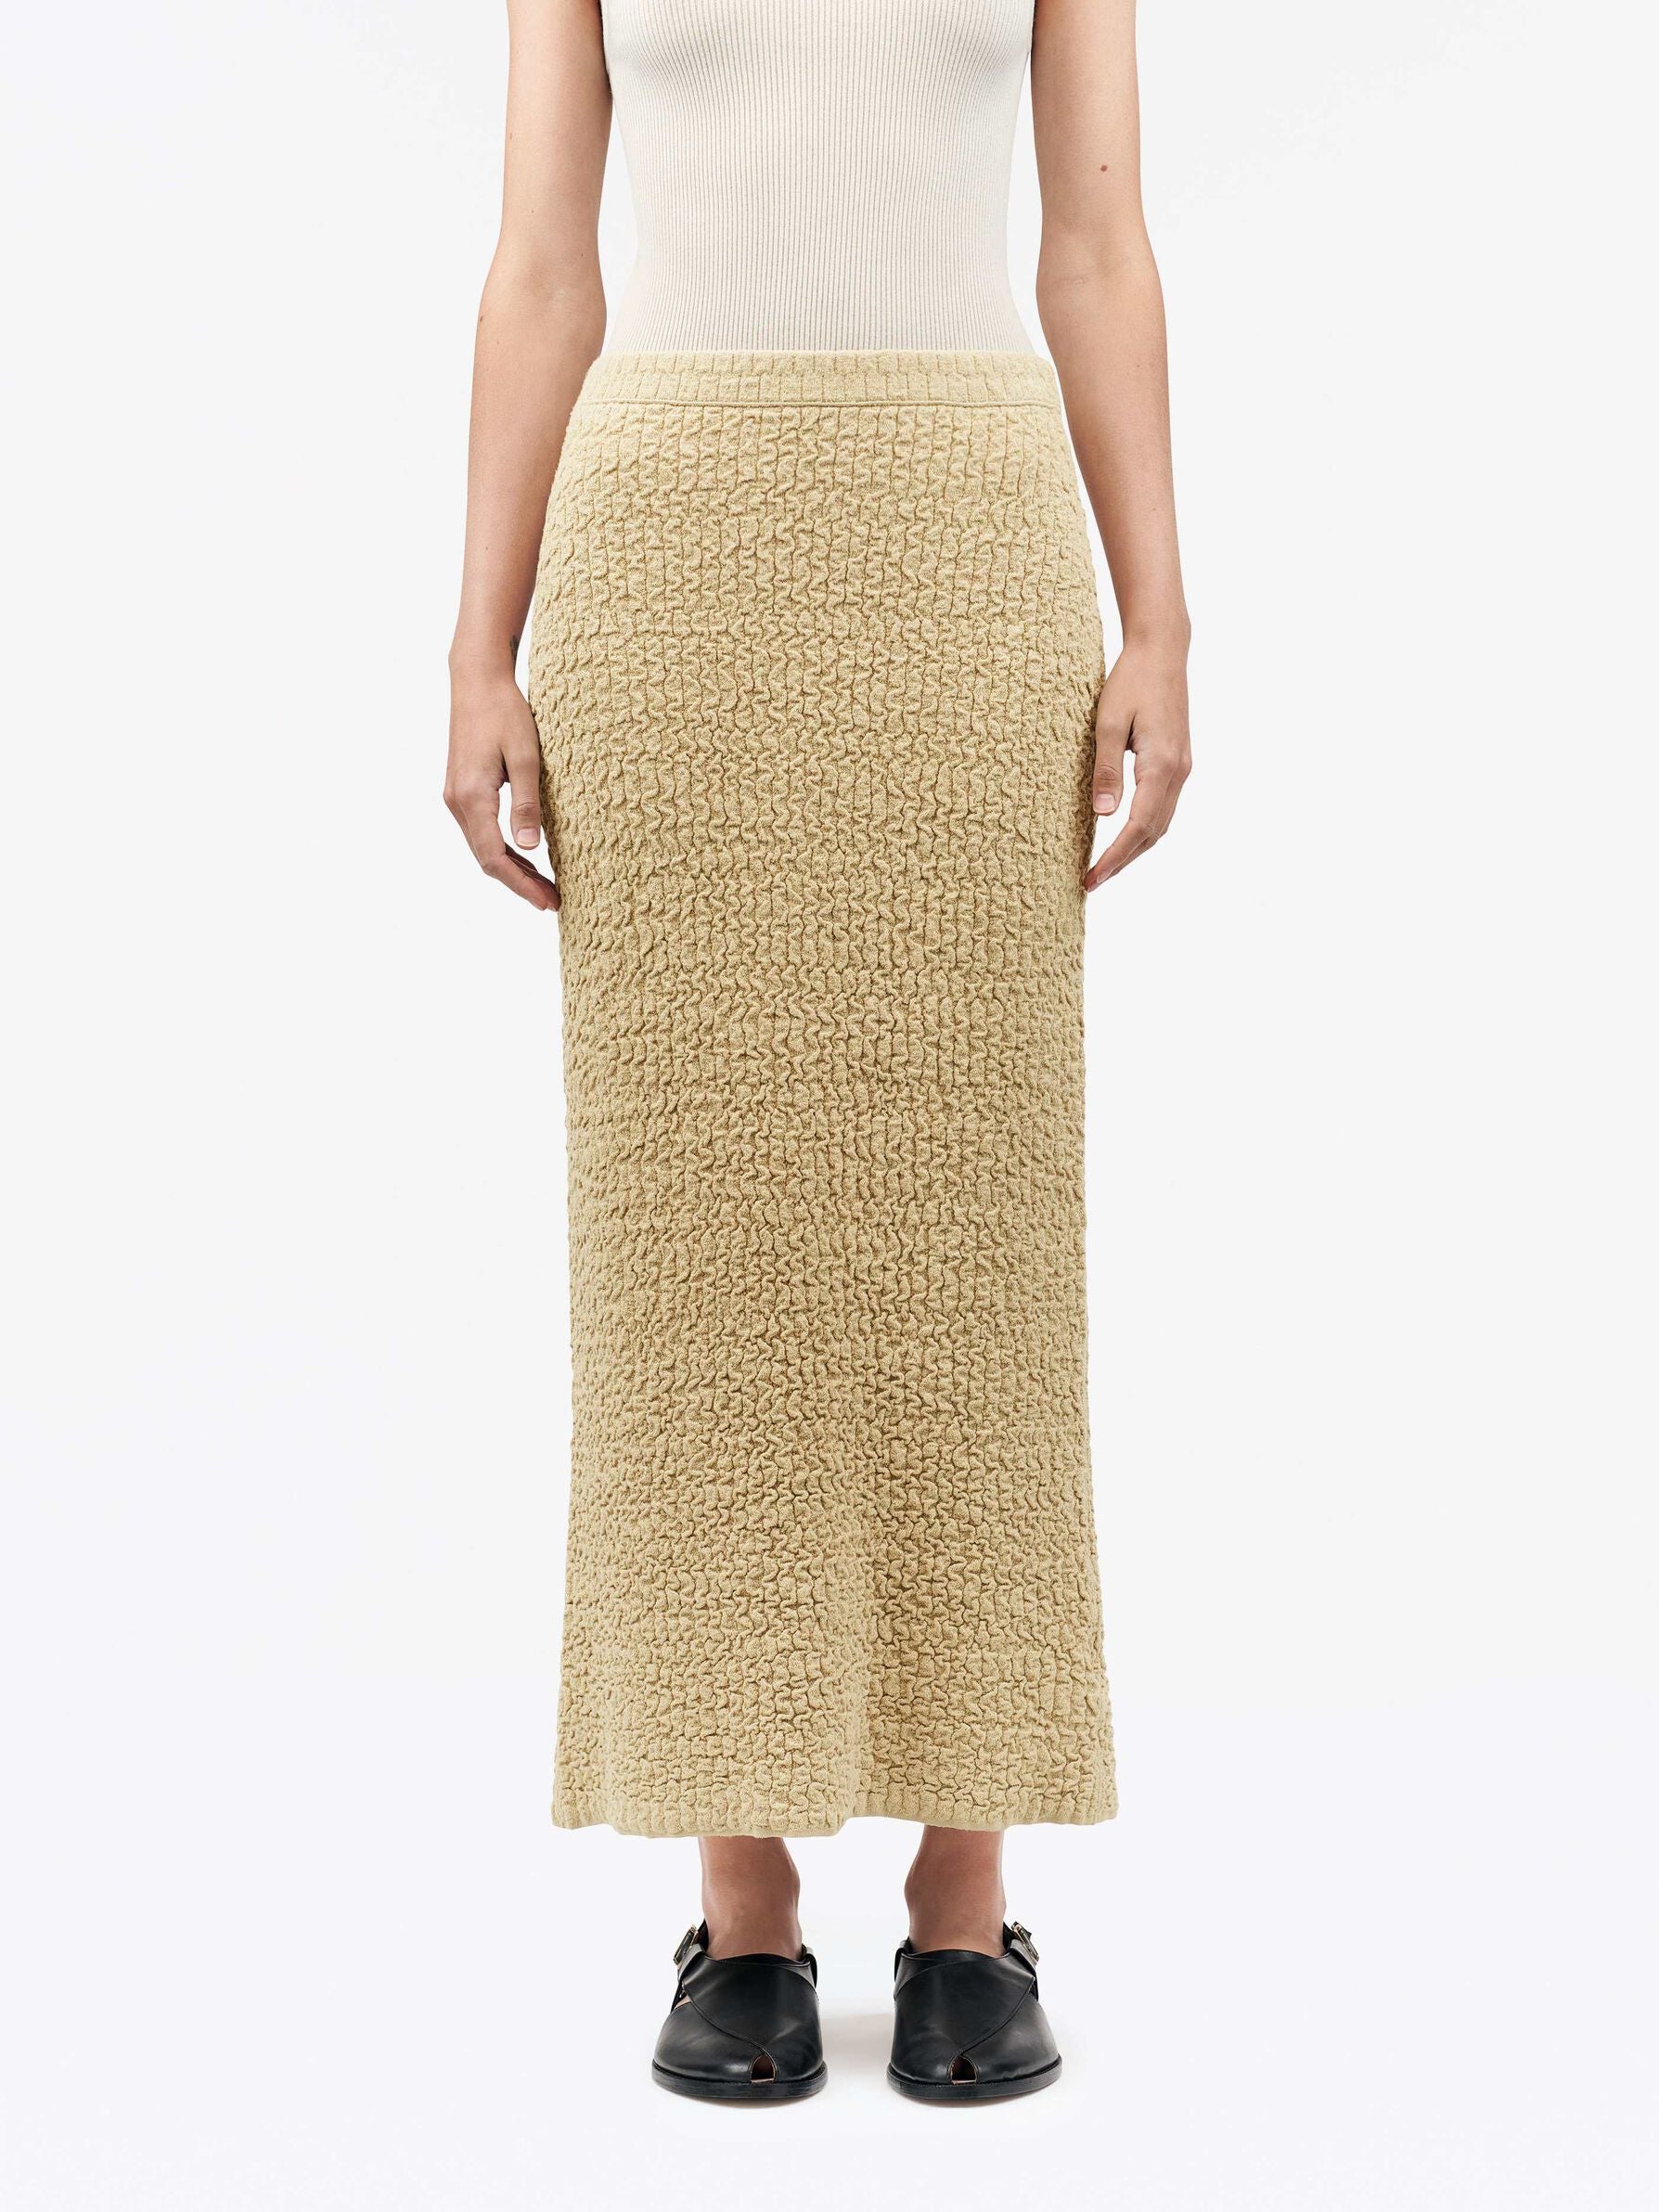 Arrianna Skirt - Pale Clay - Tiger of Sweden - Danali - S72196002